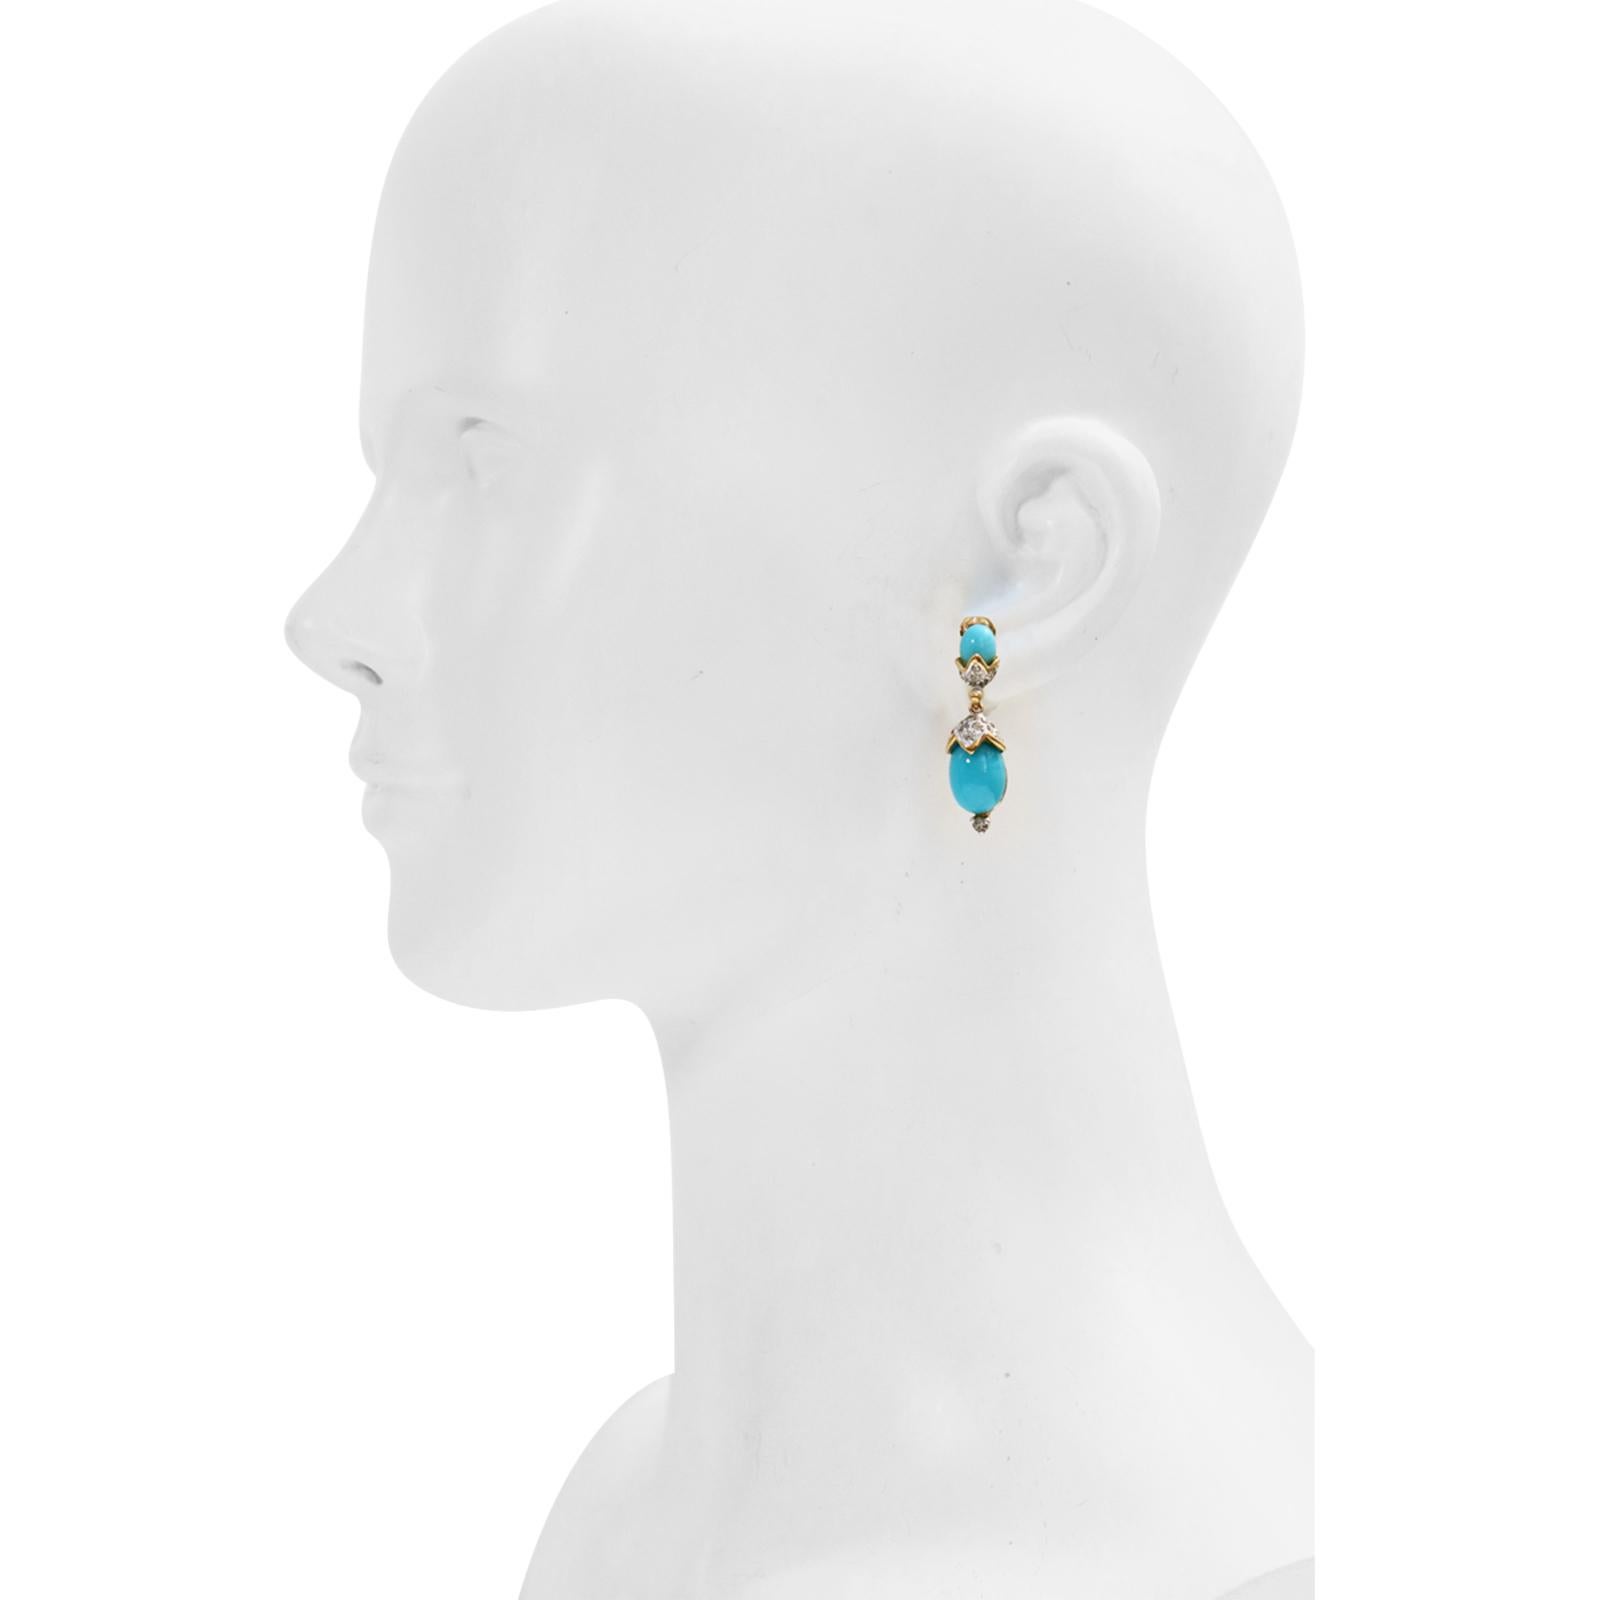 Vintage Panetta Faux Turquoise Dangling Earrings Circa 1980s For Sale 4